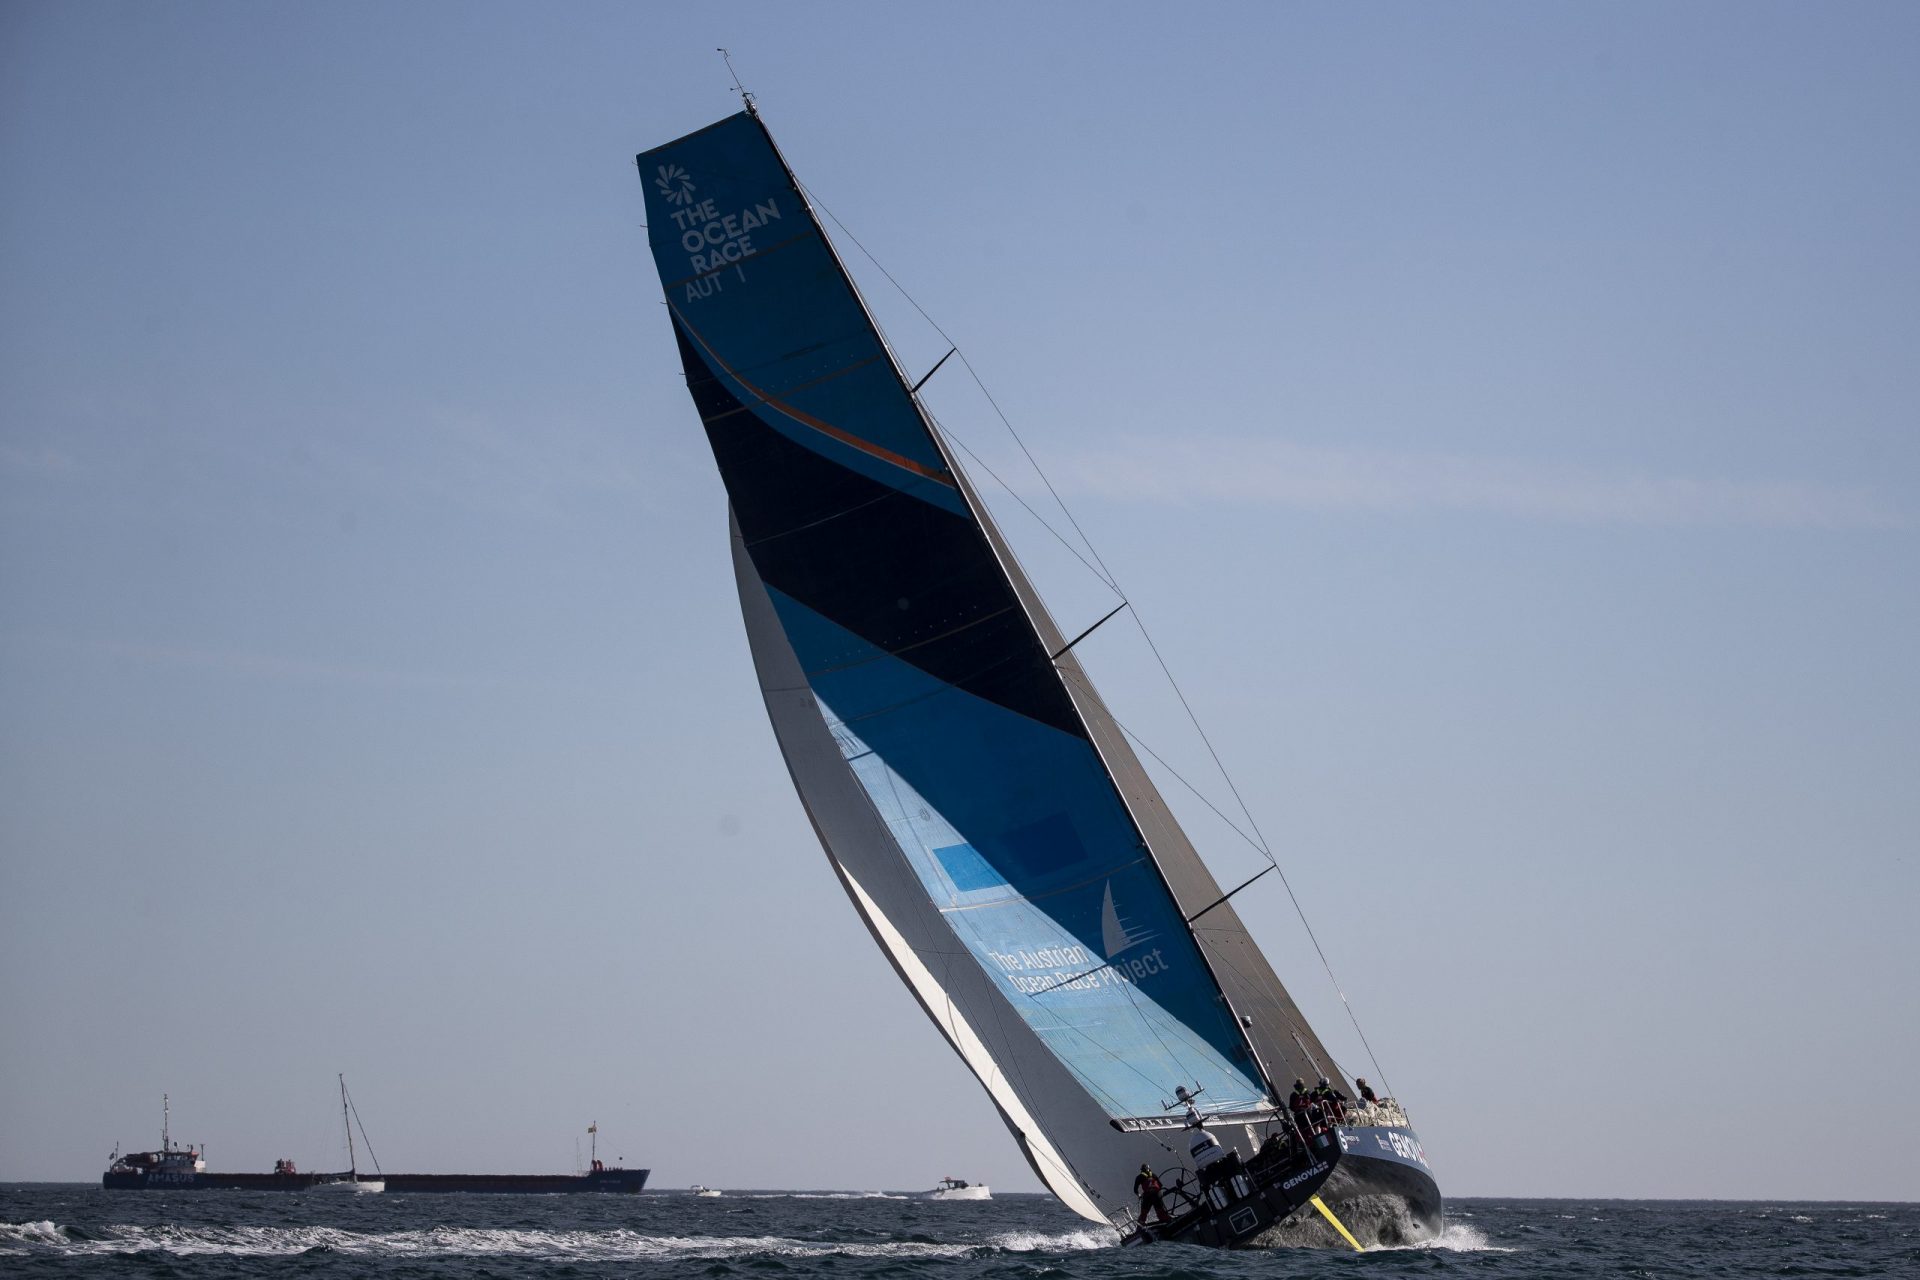 <p>Both the JAJO Team and the Mirpuri Trifork Racing team used the same sailboats during the 2023 race, a VO65 model specifically built for The Ocean Race Sprint. The race aimed to circumnavigate the globe, starting off in Alicante and ending in The Hague.</p>